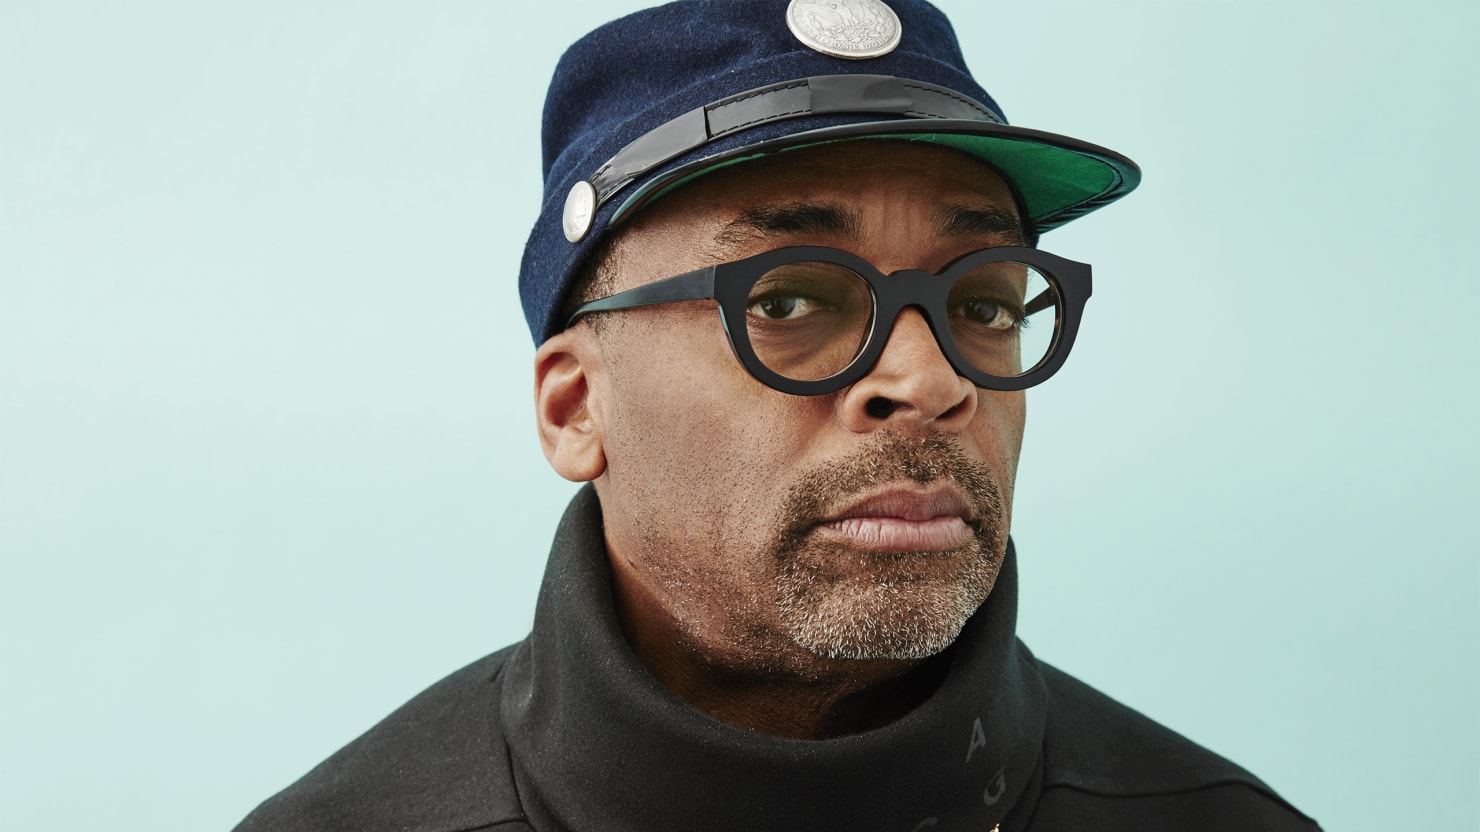 Spike Lee comes to the defense of Michael Jackson